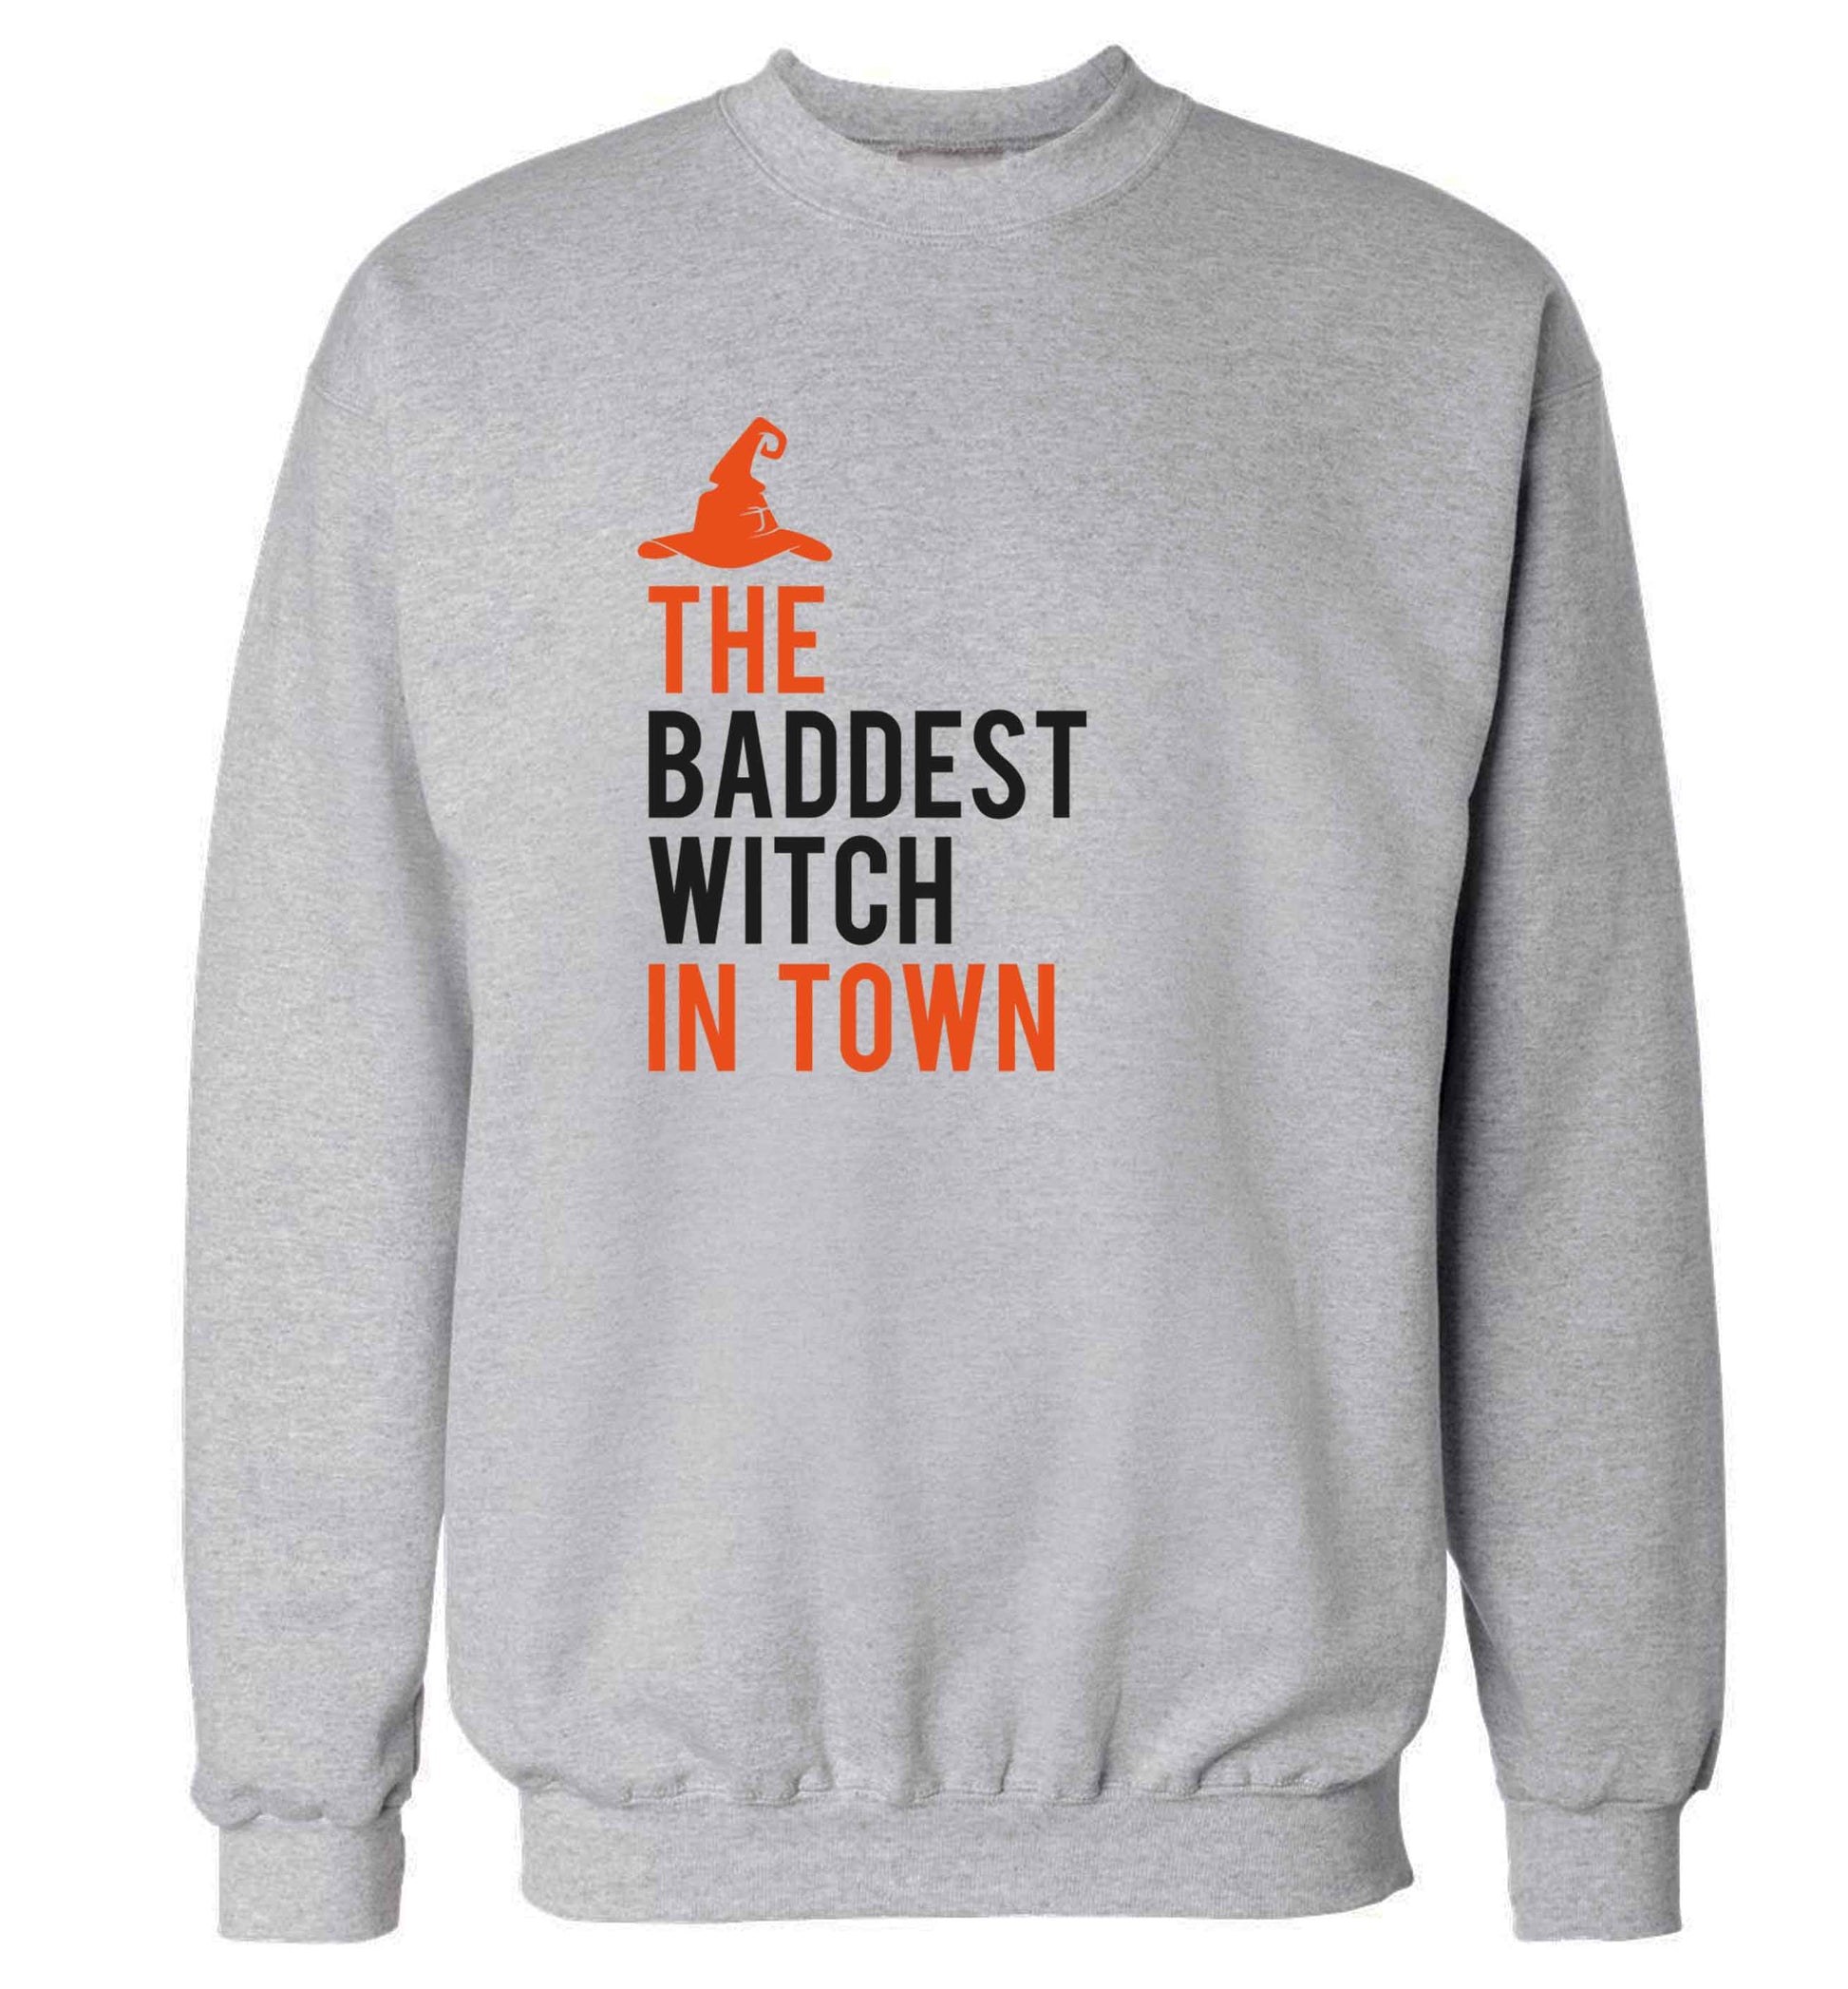 Badest witch in town adult's unisex grey sweater 2XL